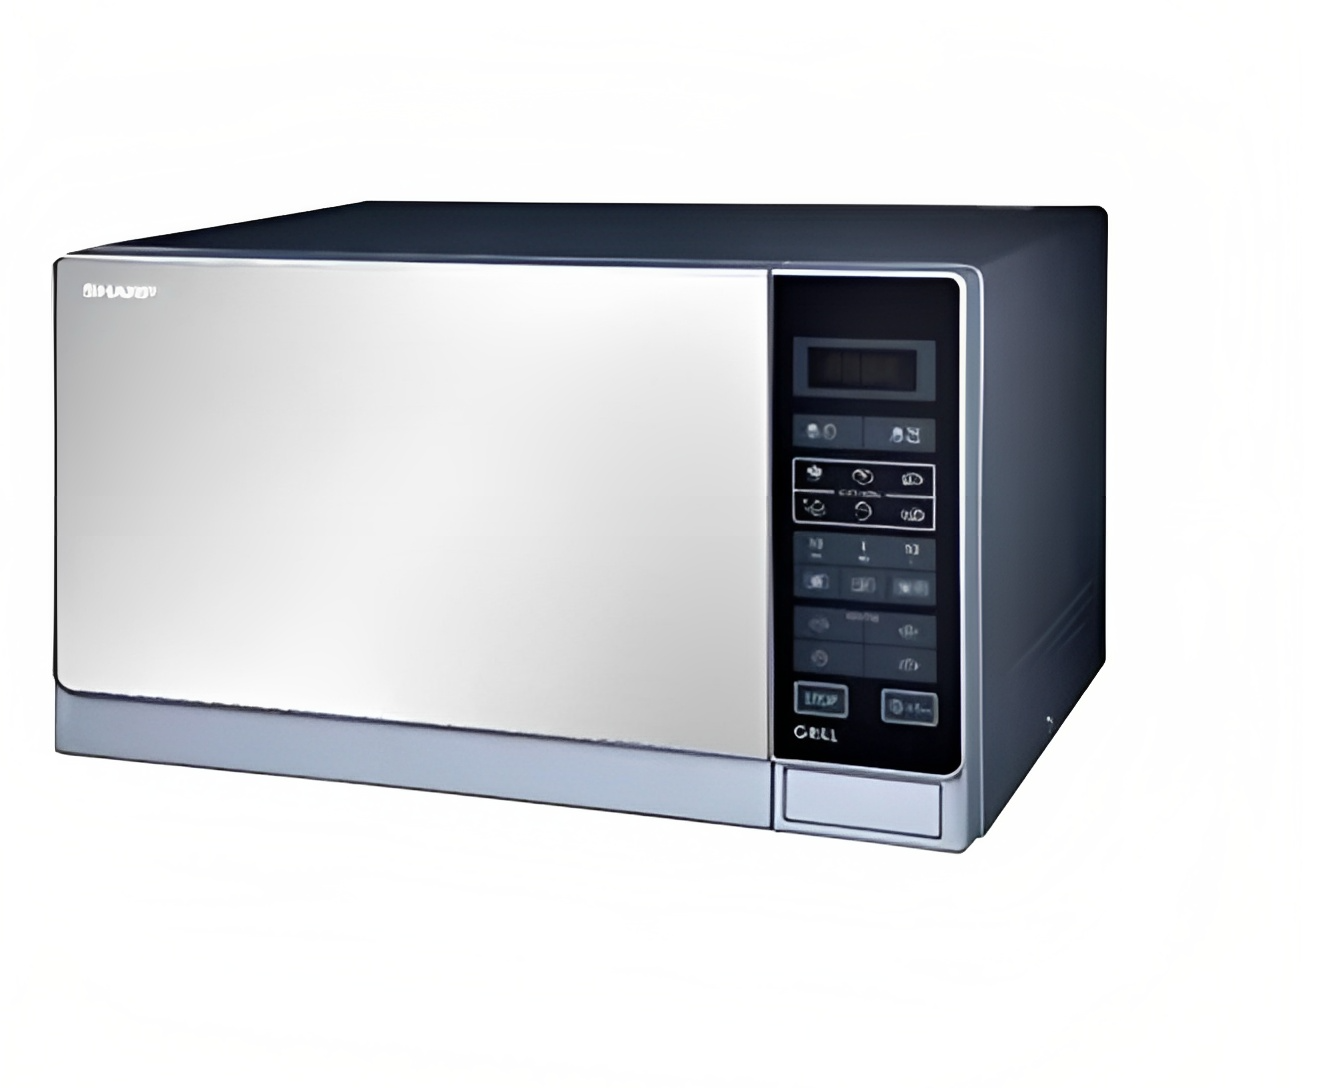 Sharp Microwave with Grill, 25 Liters, 1000 Watt, Silver - R-75MT(S)